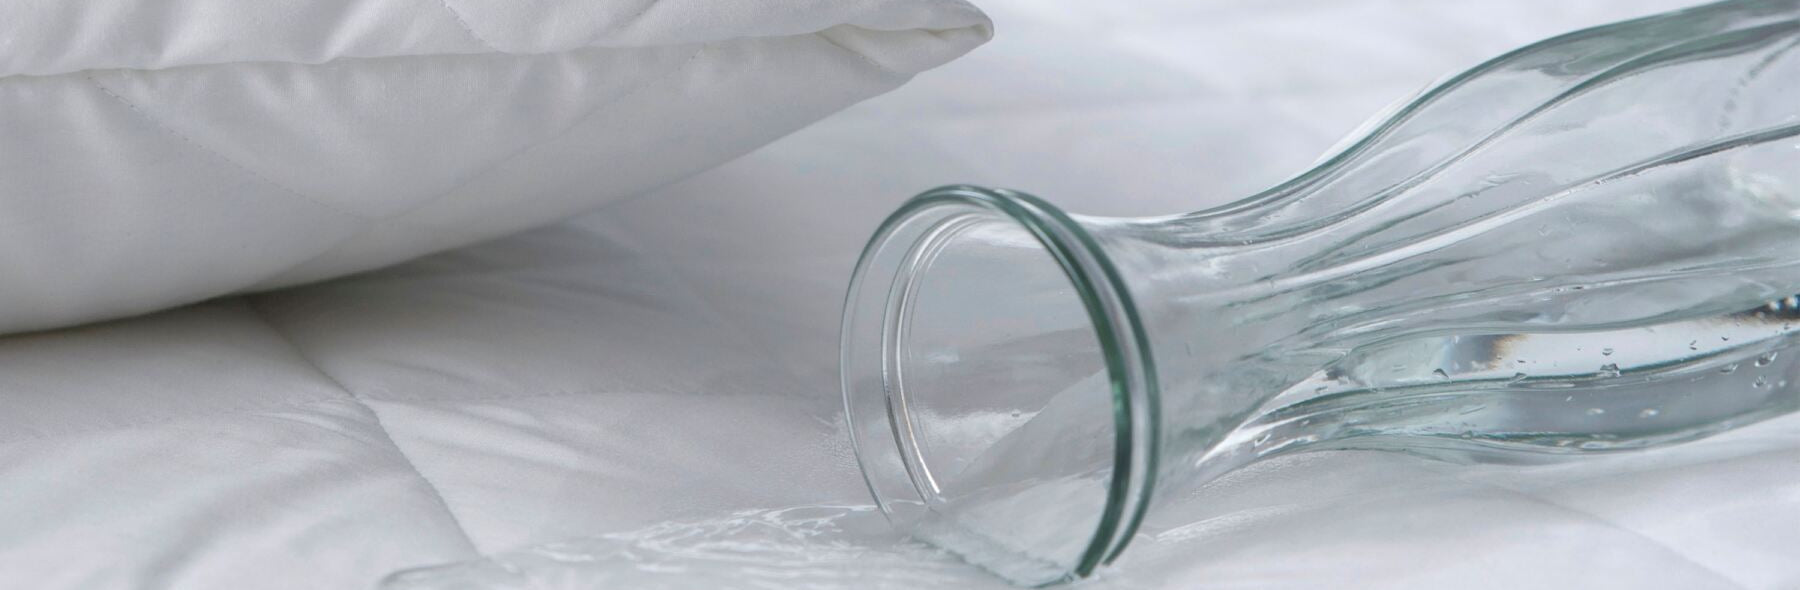 Waterproof Mattress Protectors | Quilted Waterproof Mattress Protectors | Terry Waterproof Mattress Protectors | Waterproof Bed Protectors | Incontinence Mattress Protectors. Linen Cupboard - Waterproof Mattress Protector specialists